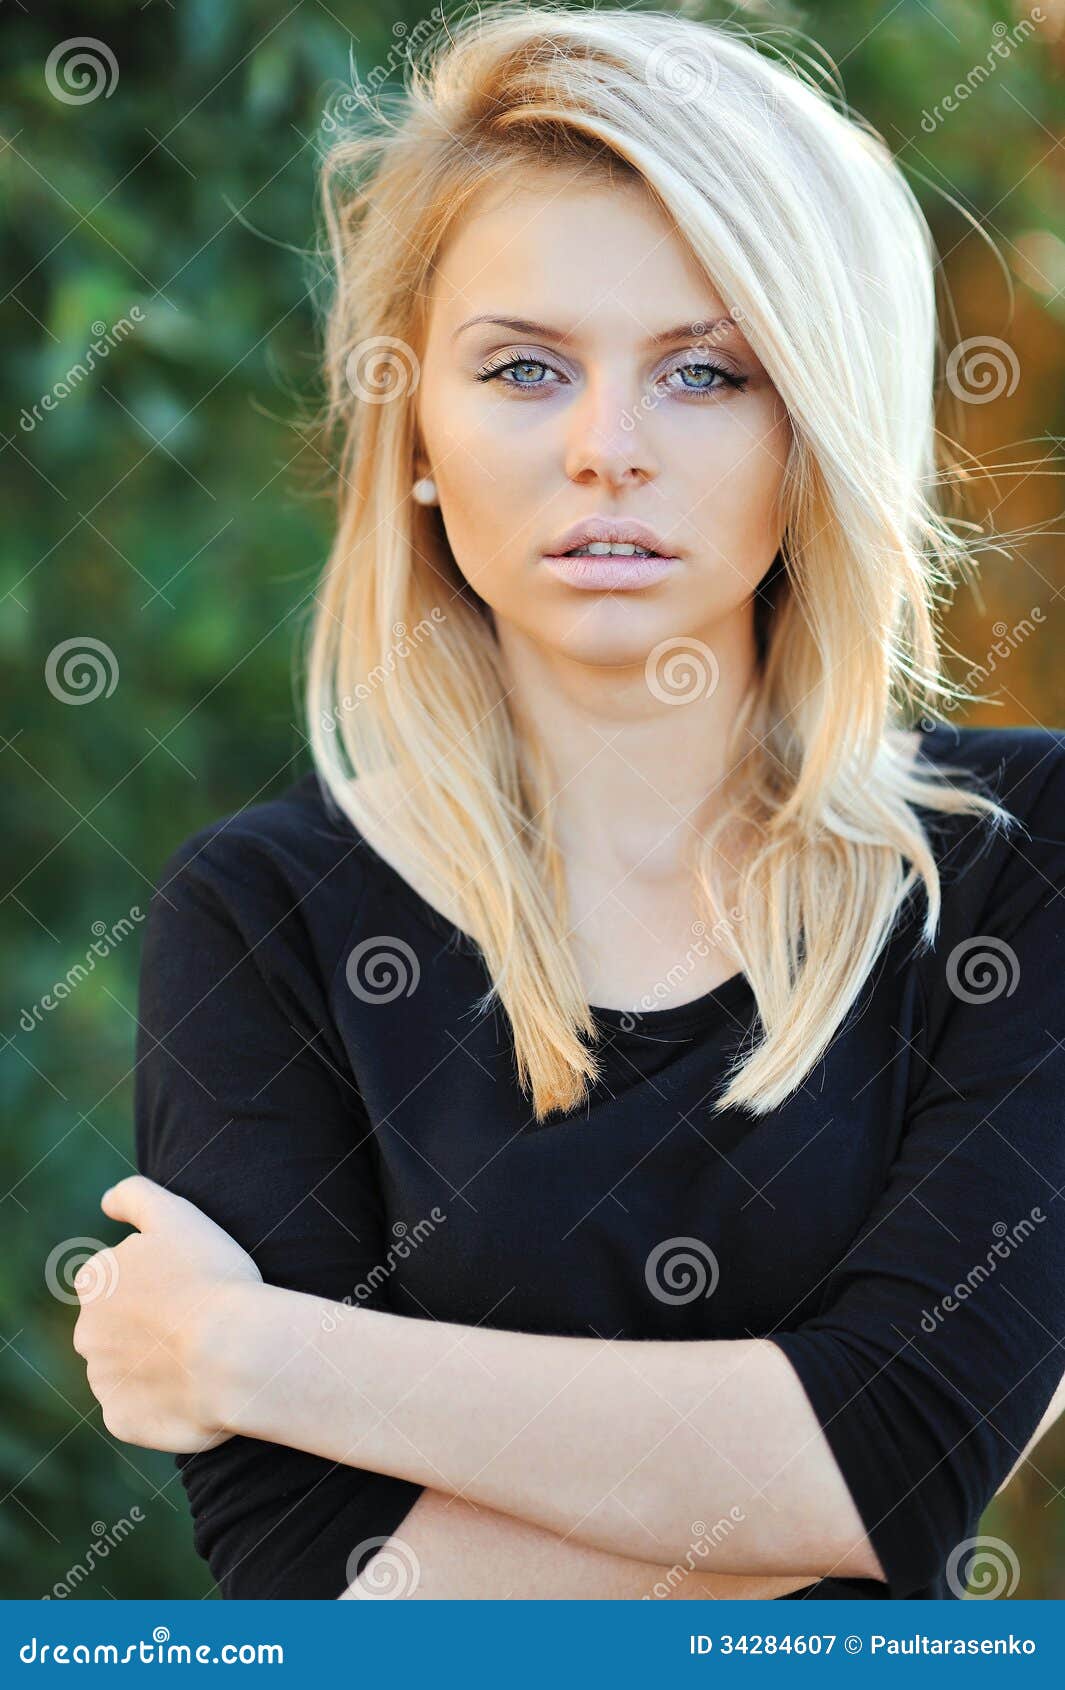 Face Of A Beautiful Outstanding Blonde Woman Closeup Stock Image